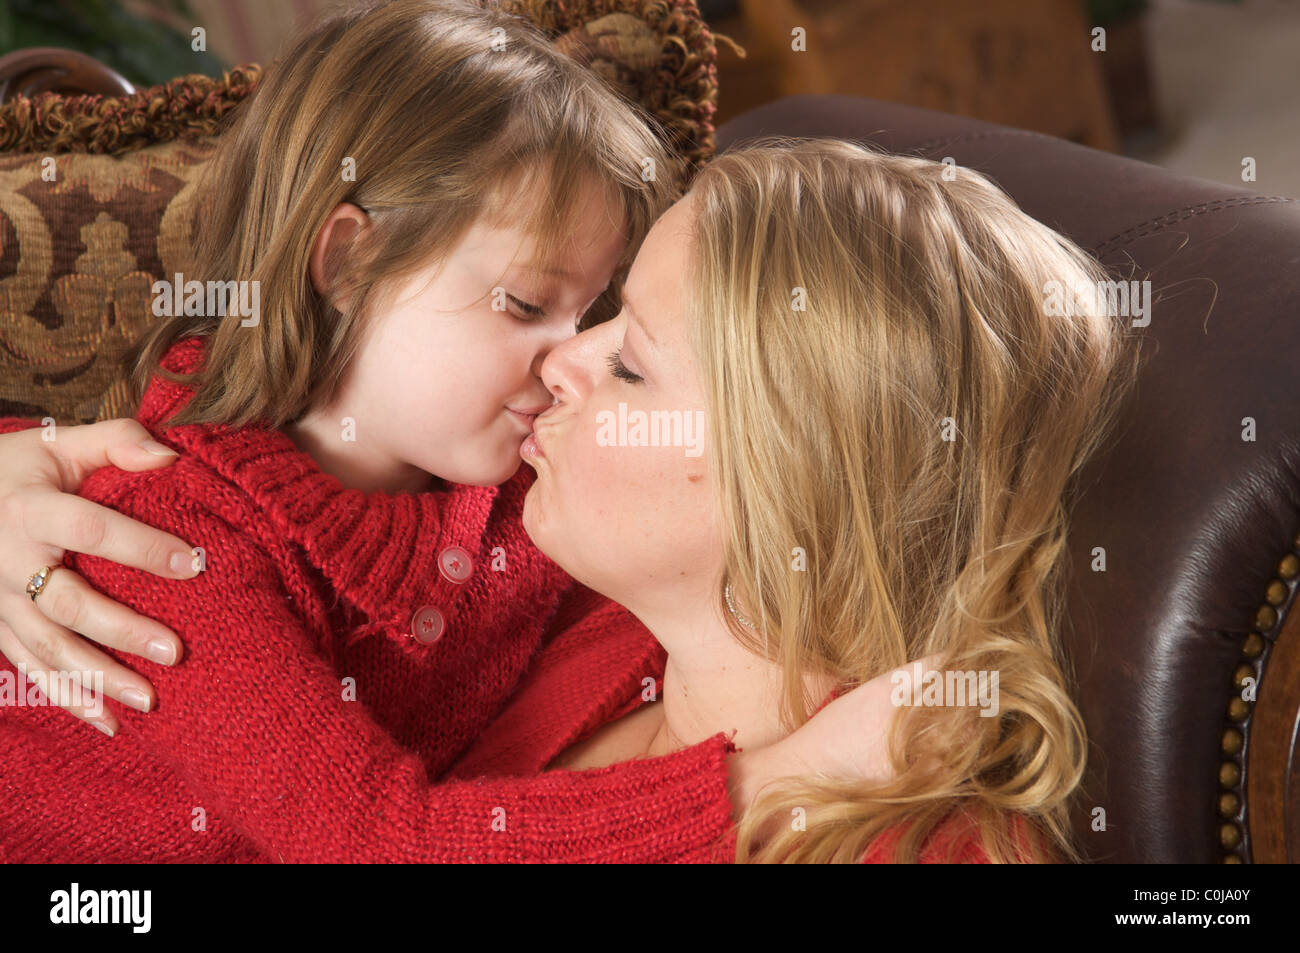 A mother smiles as she receives a kiss on the cheek from her young daughter...